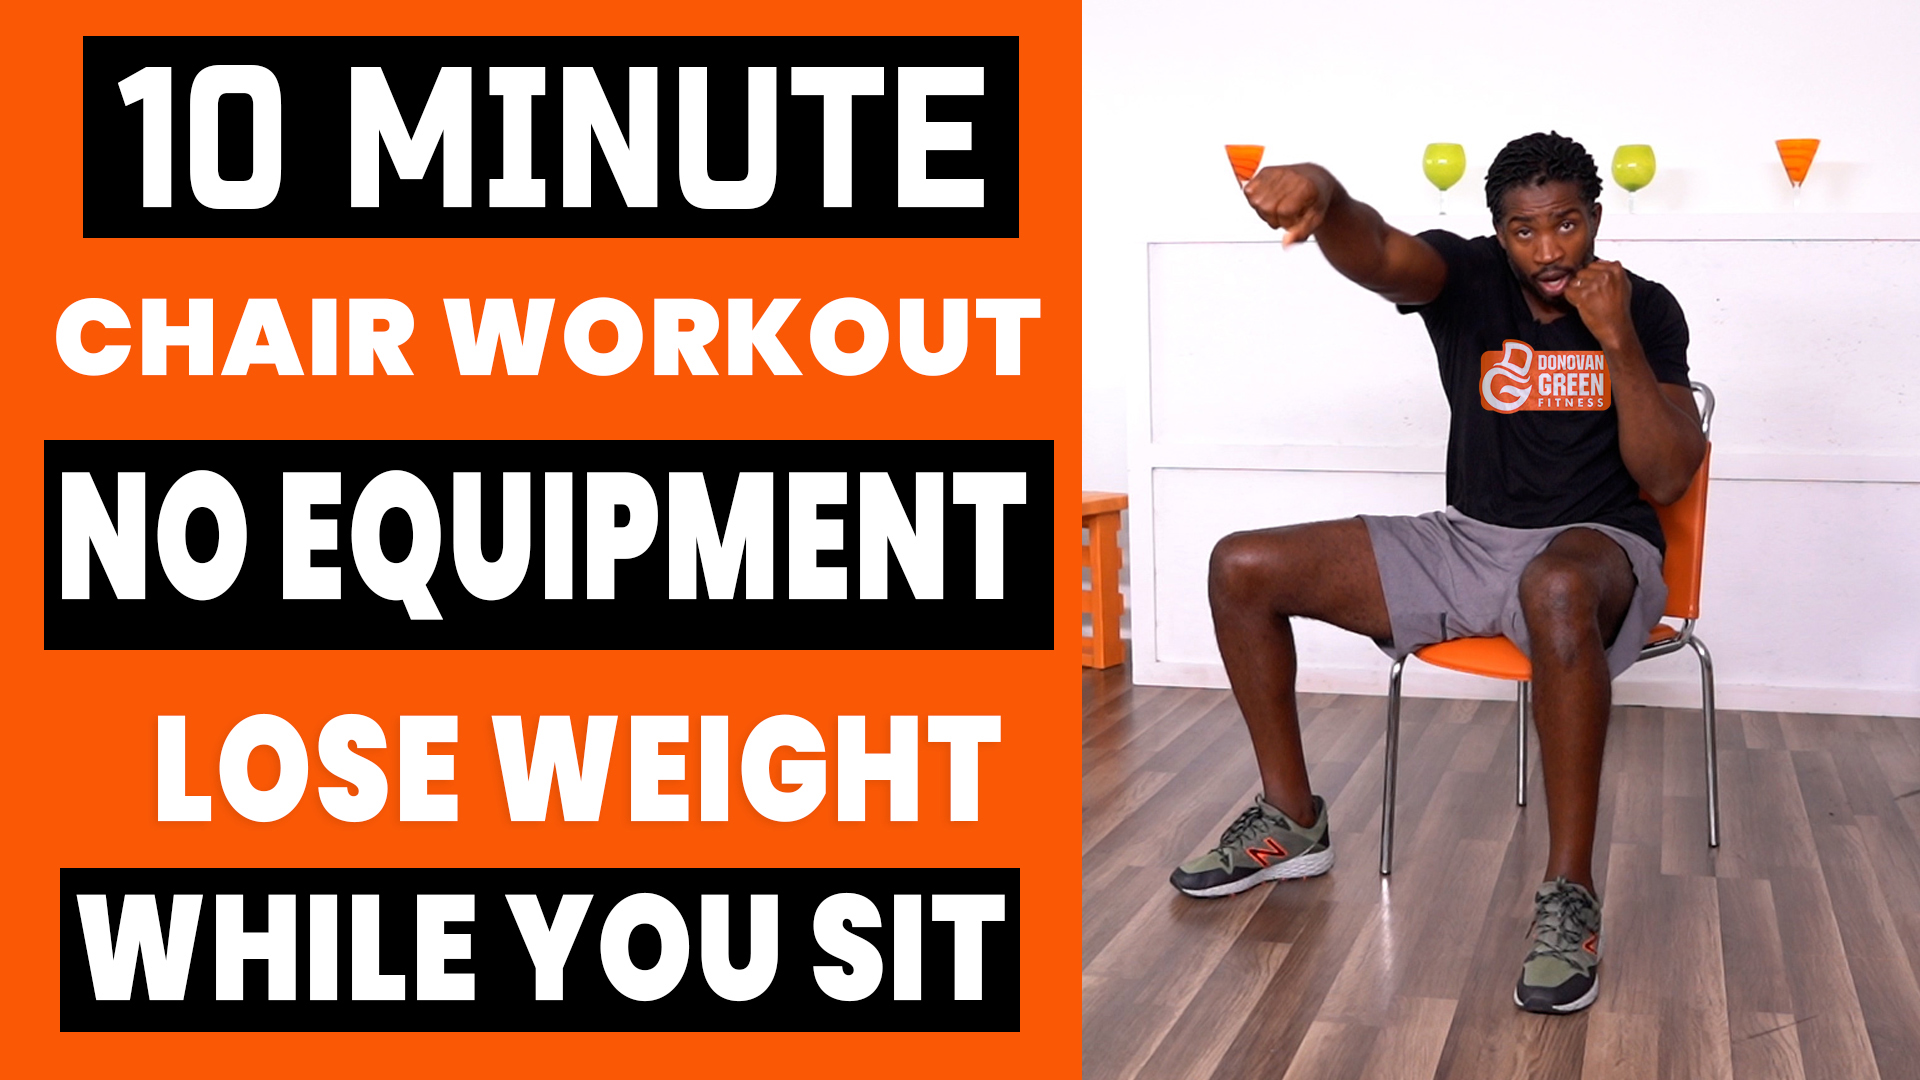 10 Minute Chair Workout For Weight Loss with NO EQUIPMENT – Chair Fit Camp